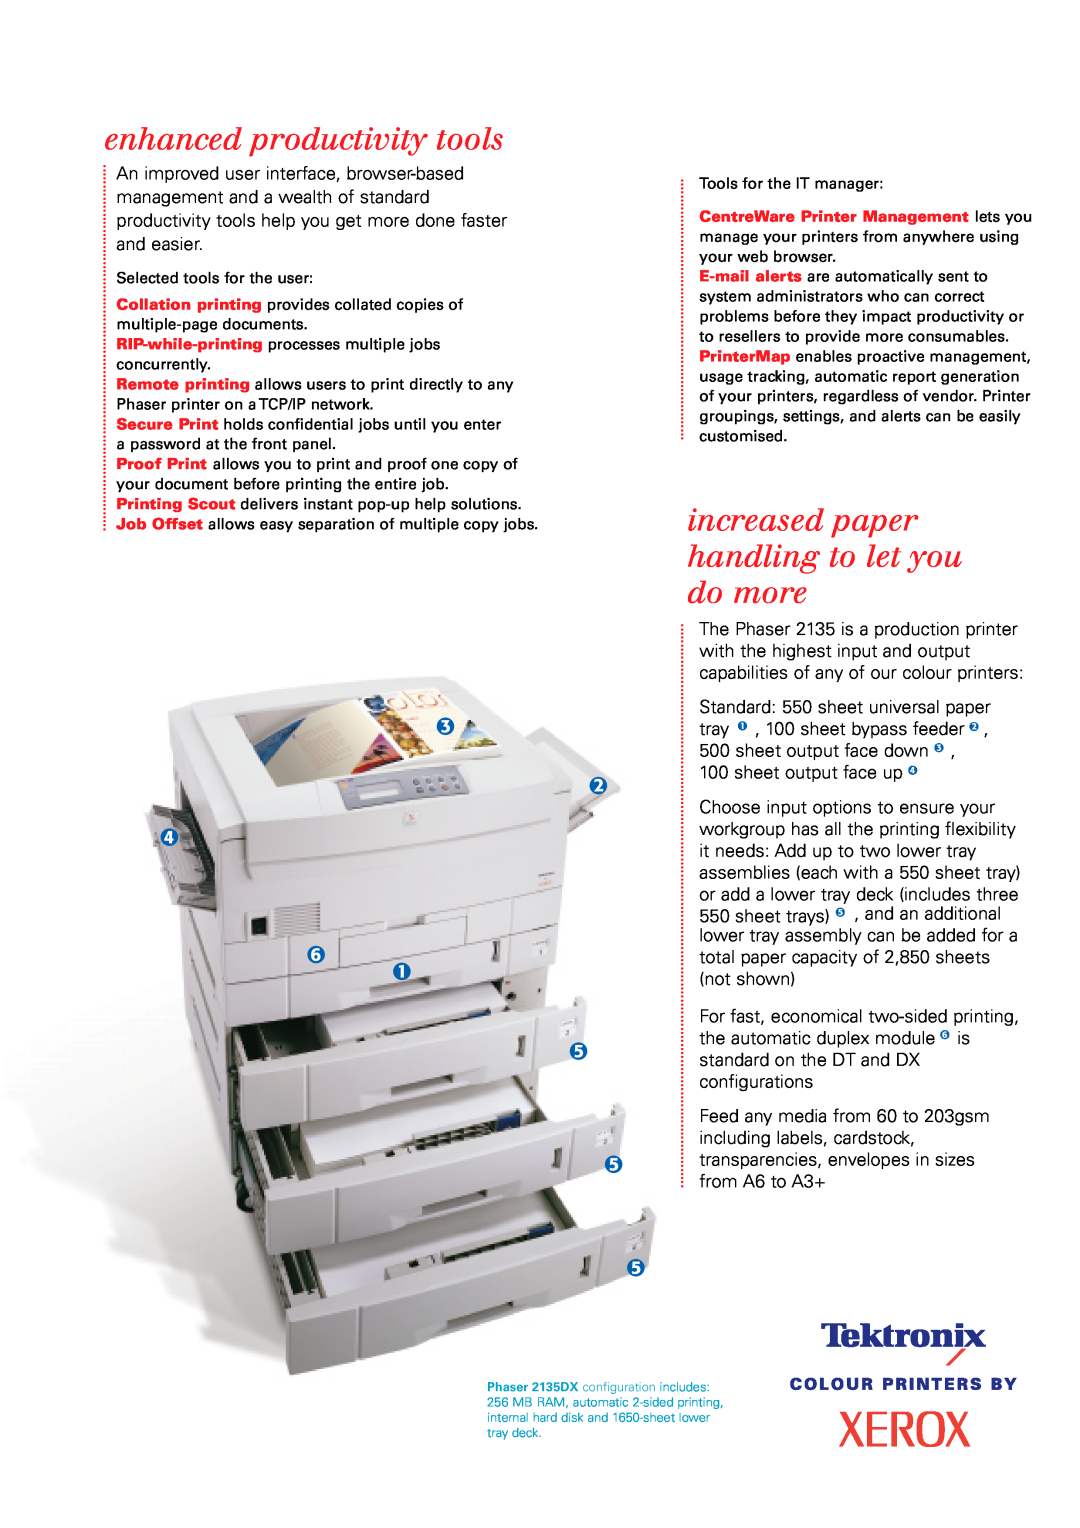 Xerox 2135DT, 2135N brochure enhanced productivity tools, increased paper handling to let you do more 